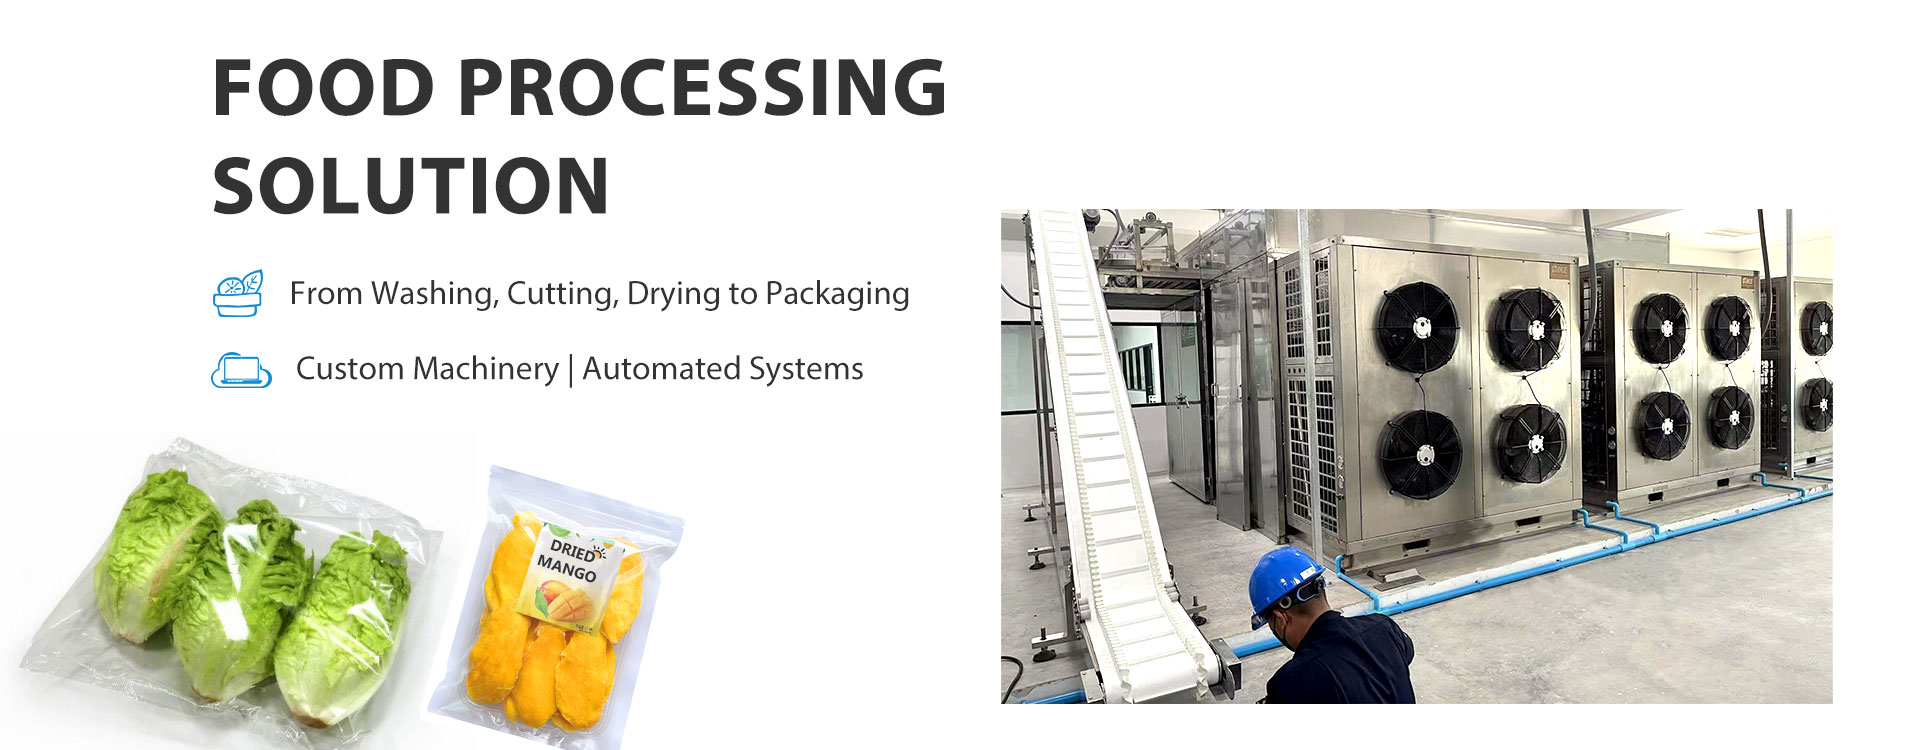 Food processing solution